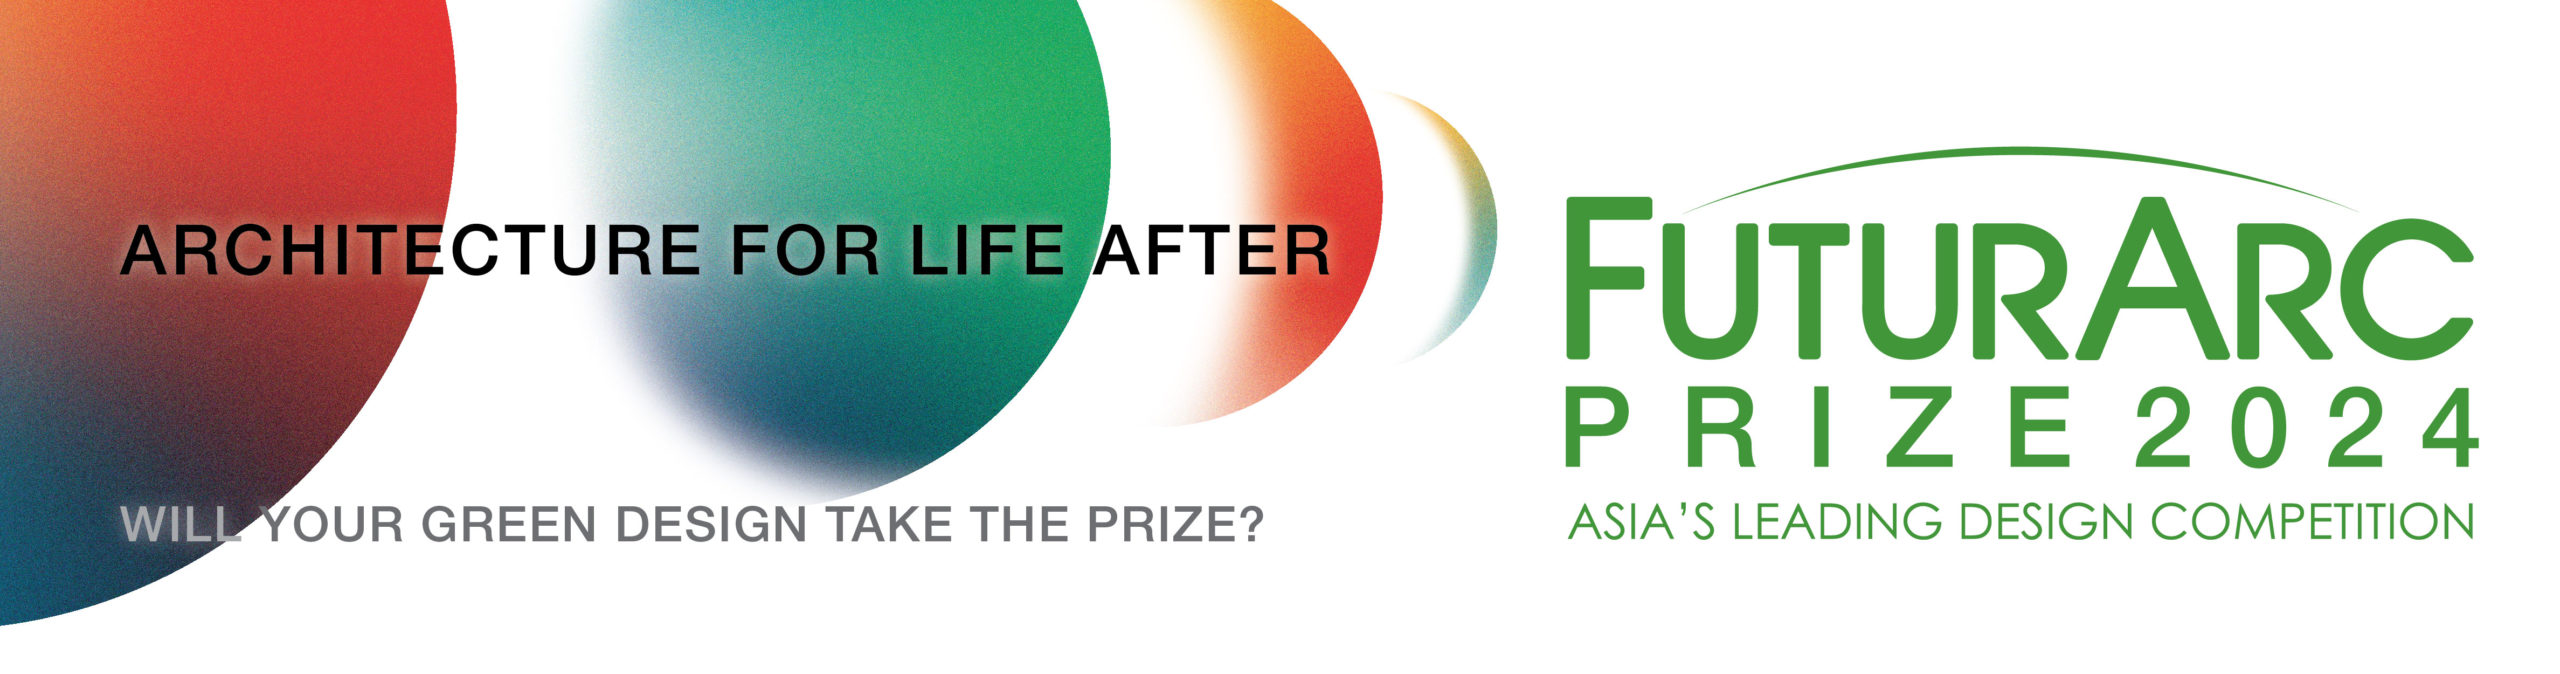 FuturArc Prize 2024: Architecture for Life After - Contest Watchers